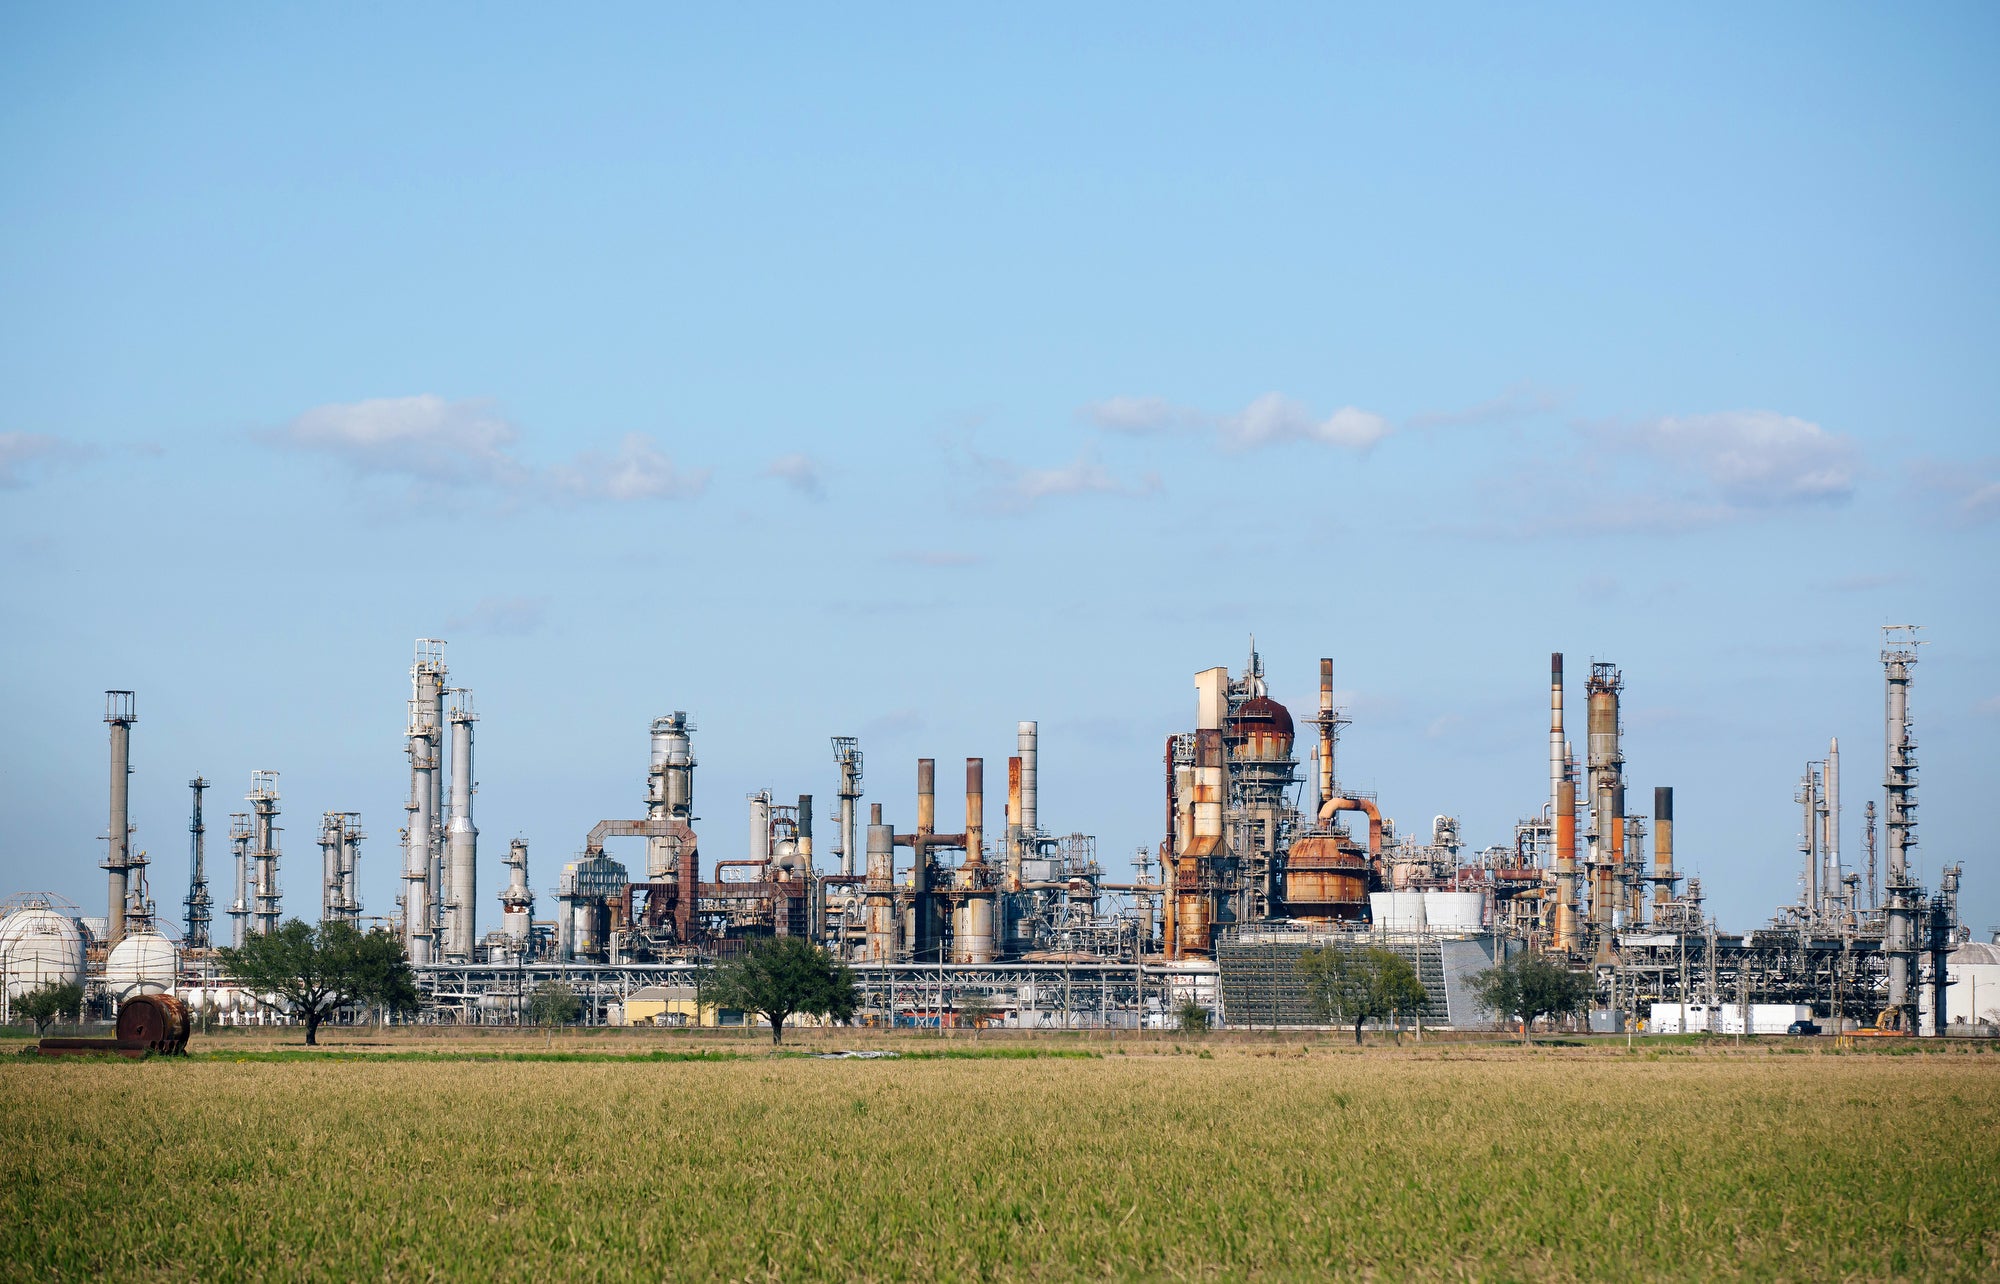 Fossil fuel refinery with a blue sky and field in foreground.